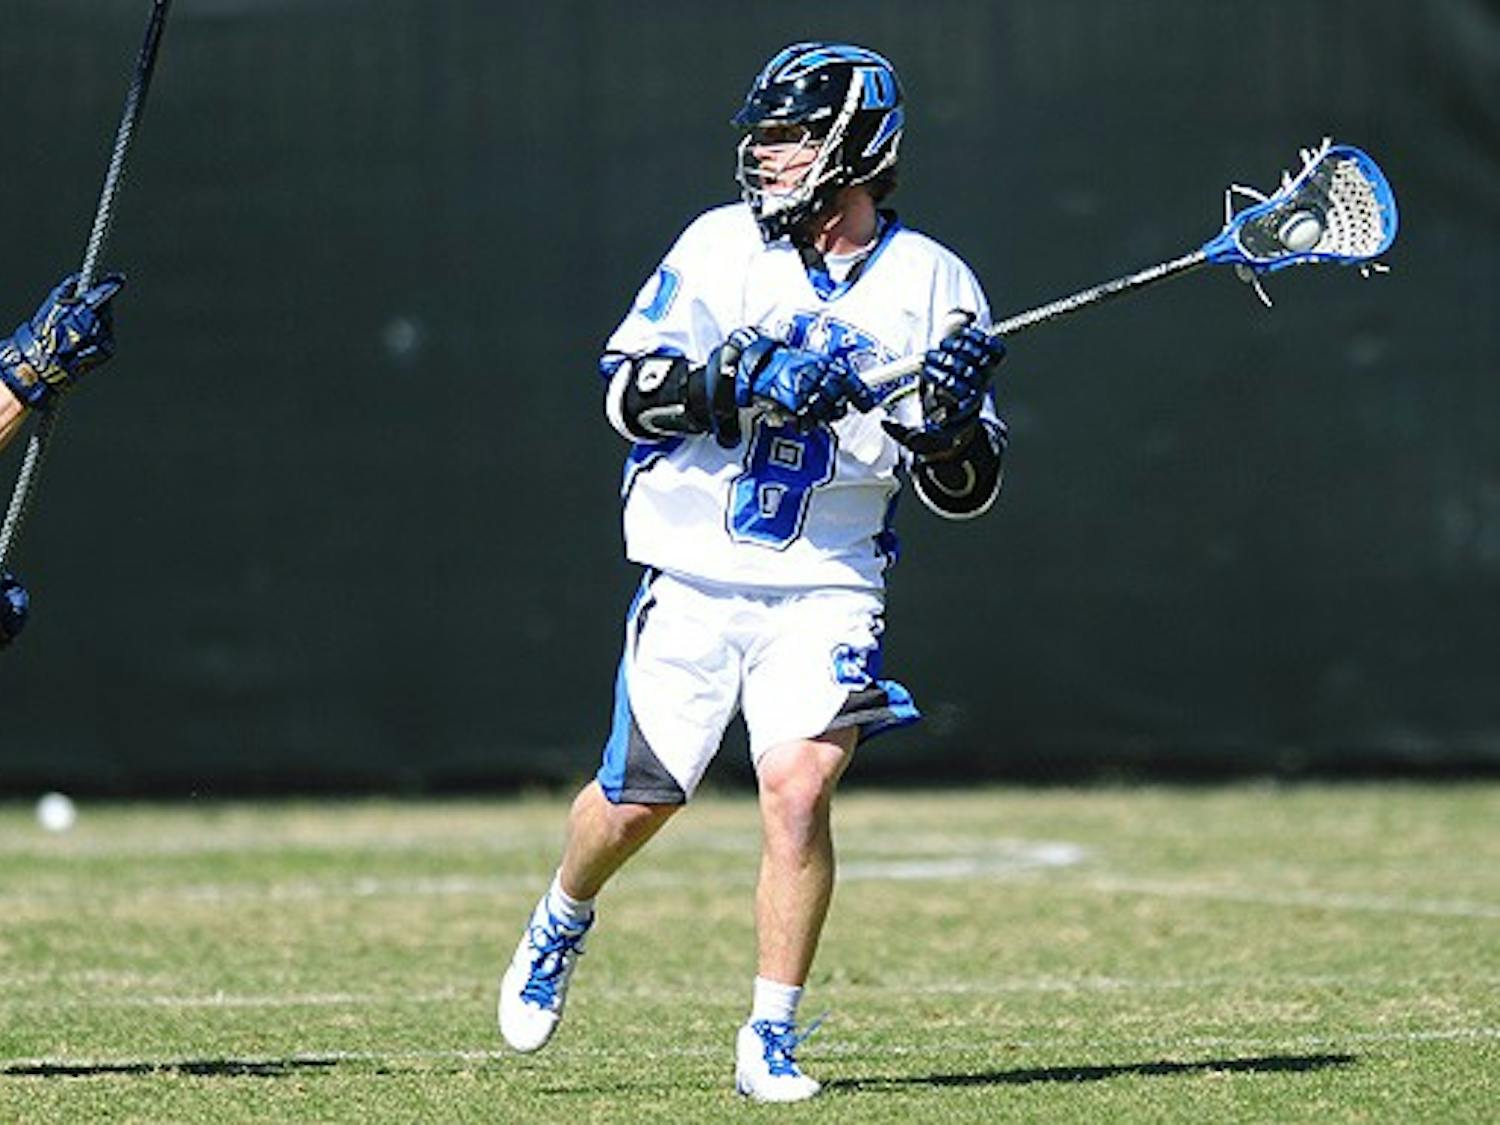 Senior Max Quinzani’s eight goals Saturday against Pennsylvania made him Duke’s leading scorer by 10 goals over attackman Ned Crotty.